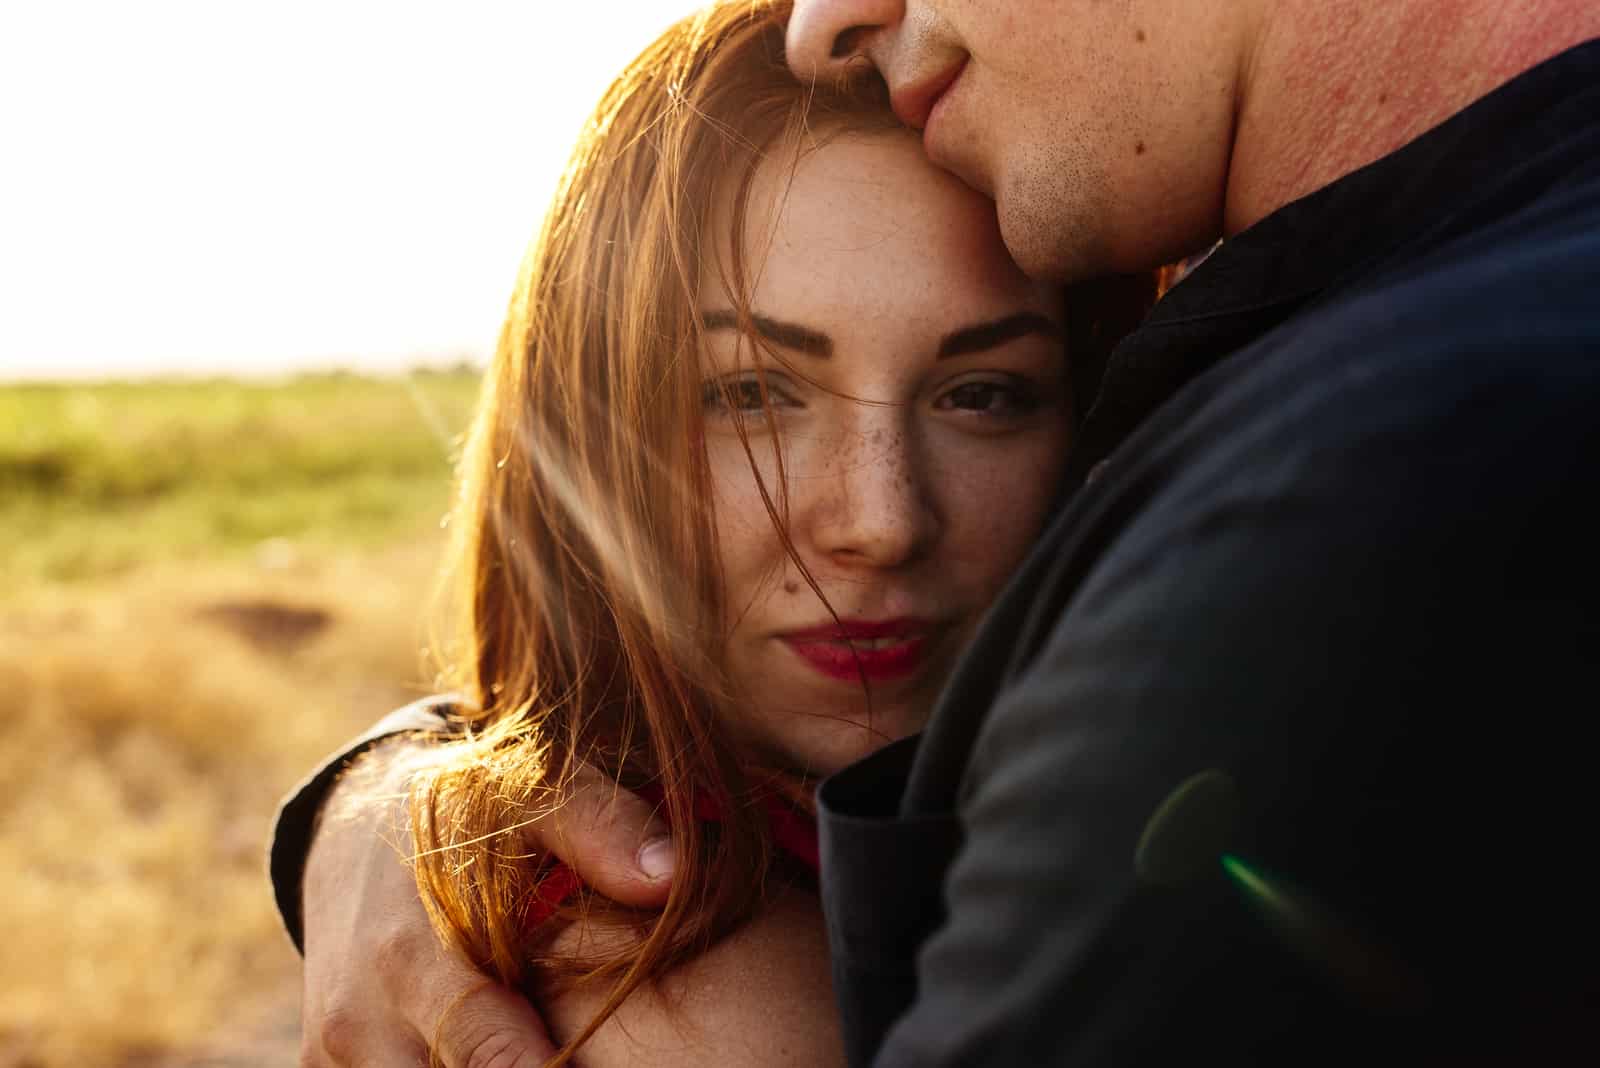 at sunset a man hugs a girl tightly